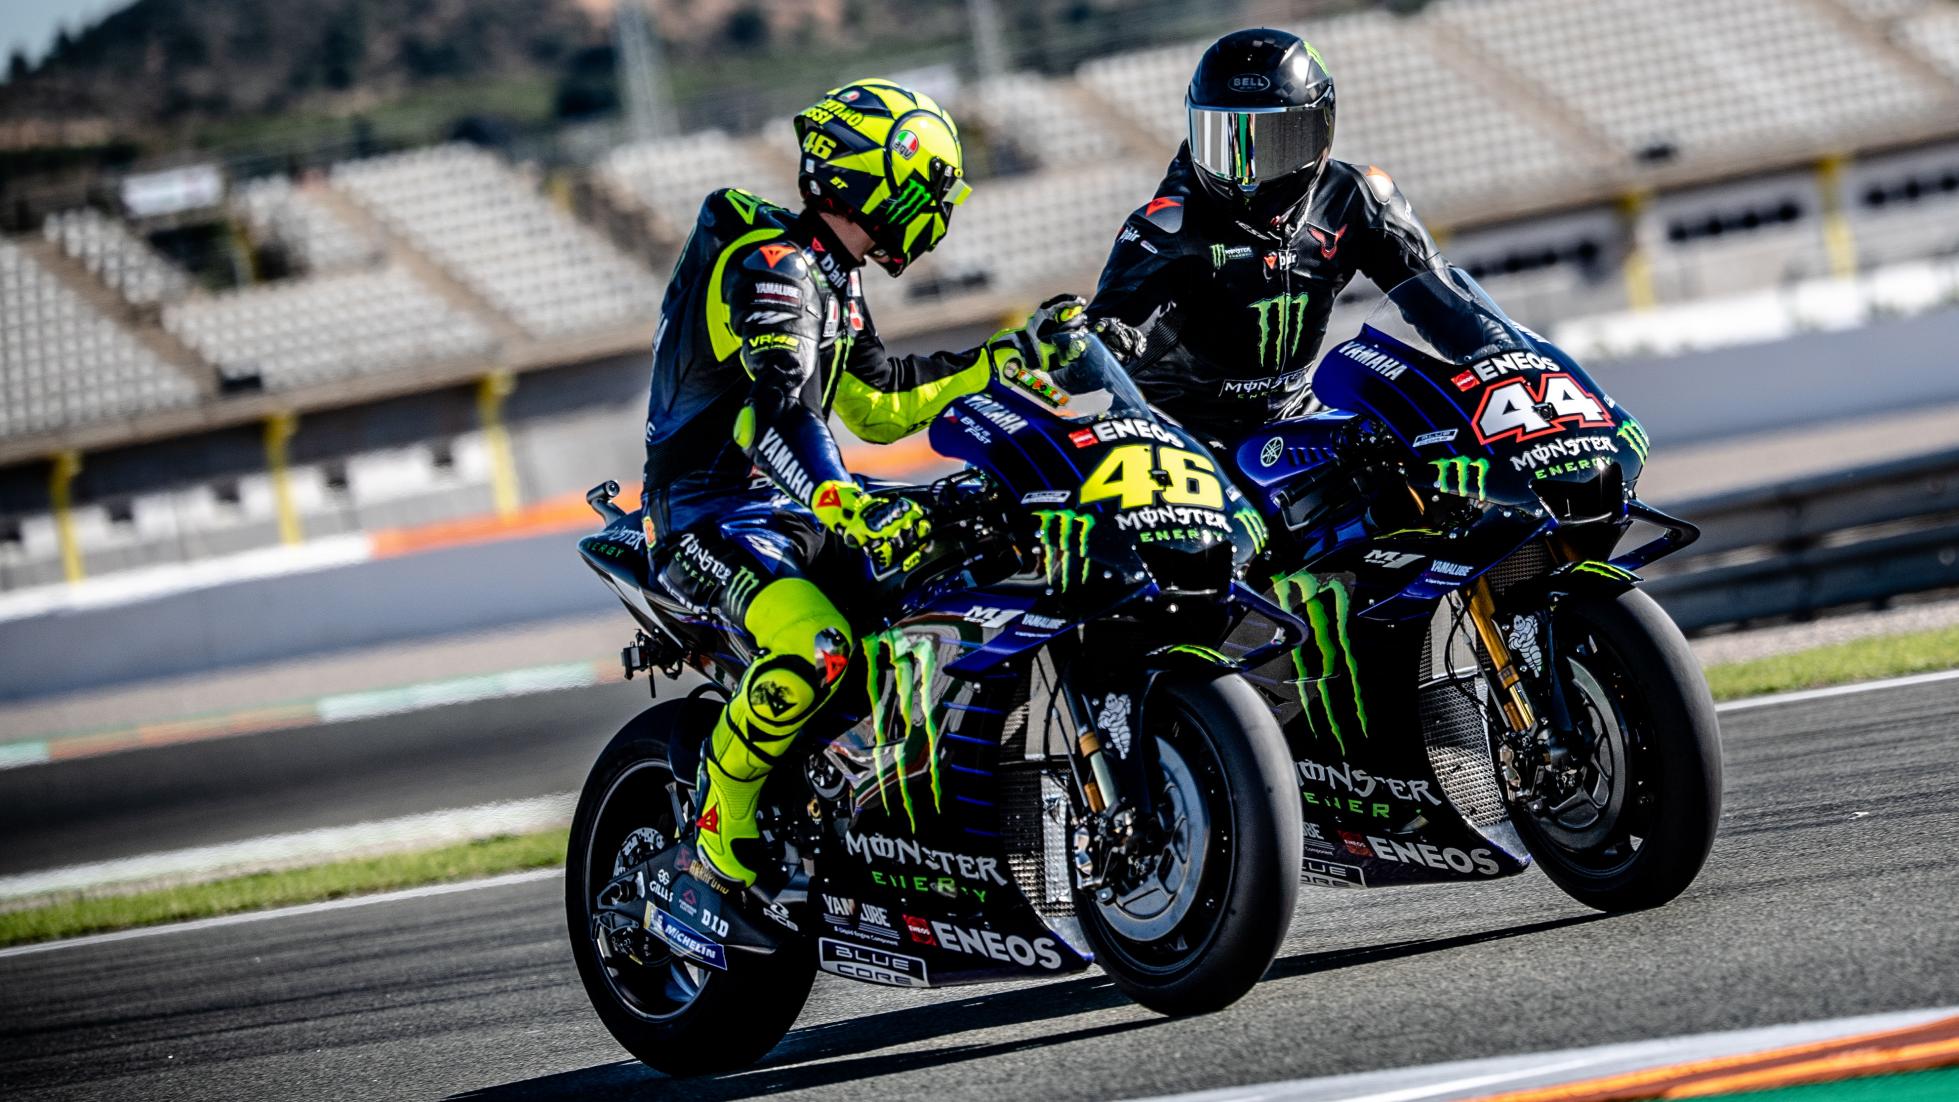 VR46 and LH44